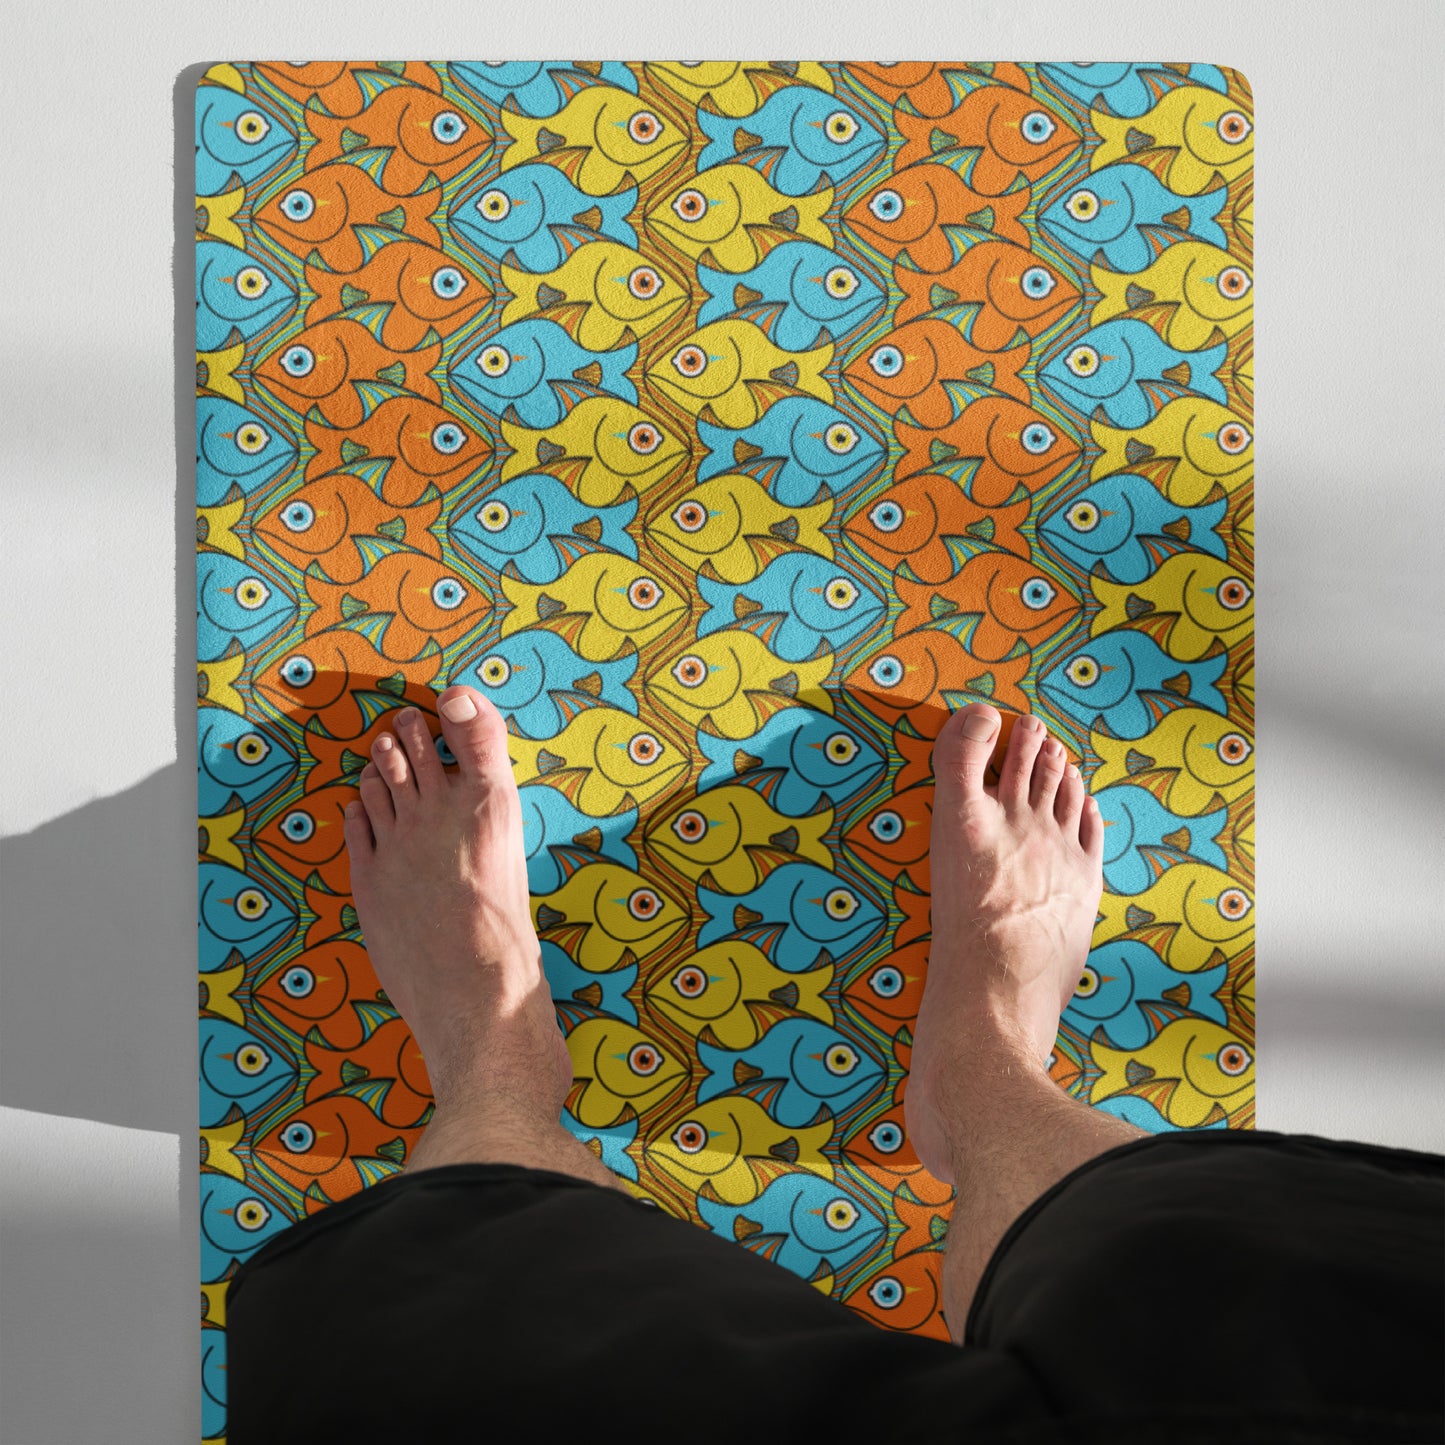 Smiling colorful fishes pattern Yoga mat. Top view